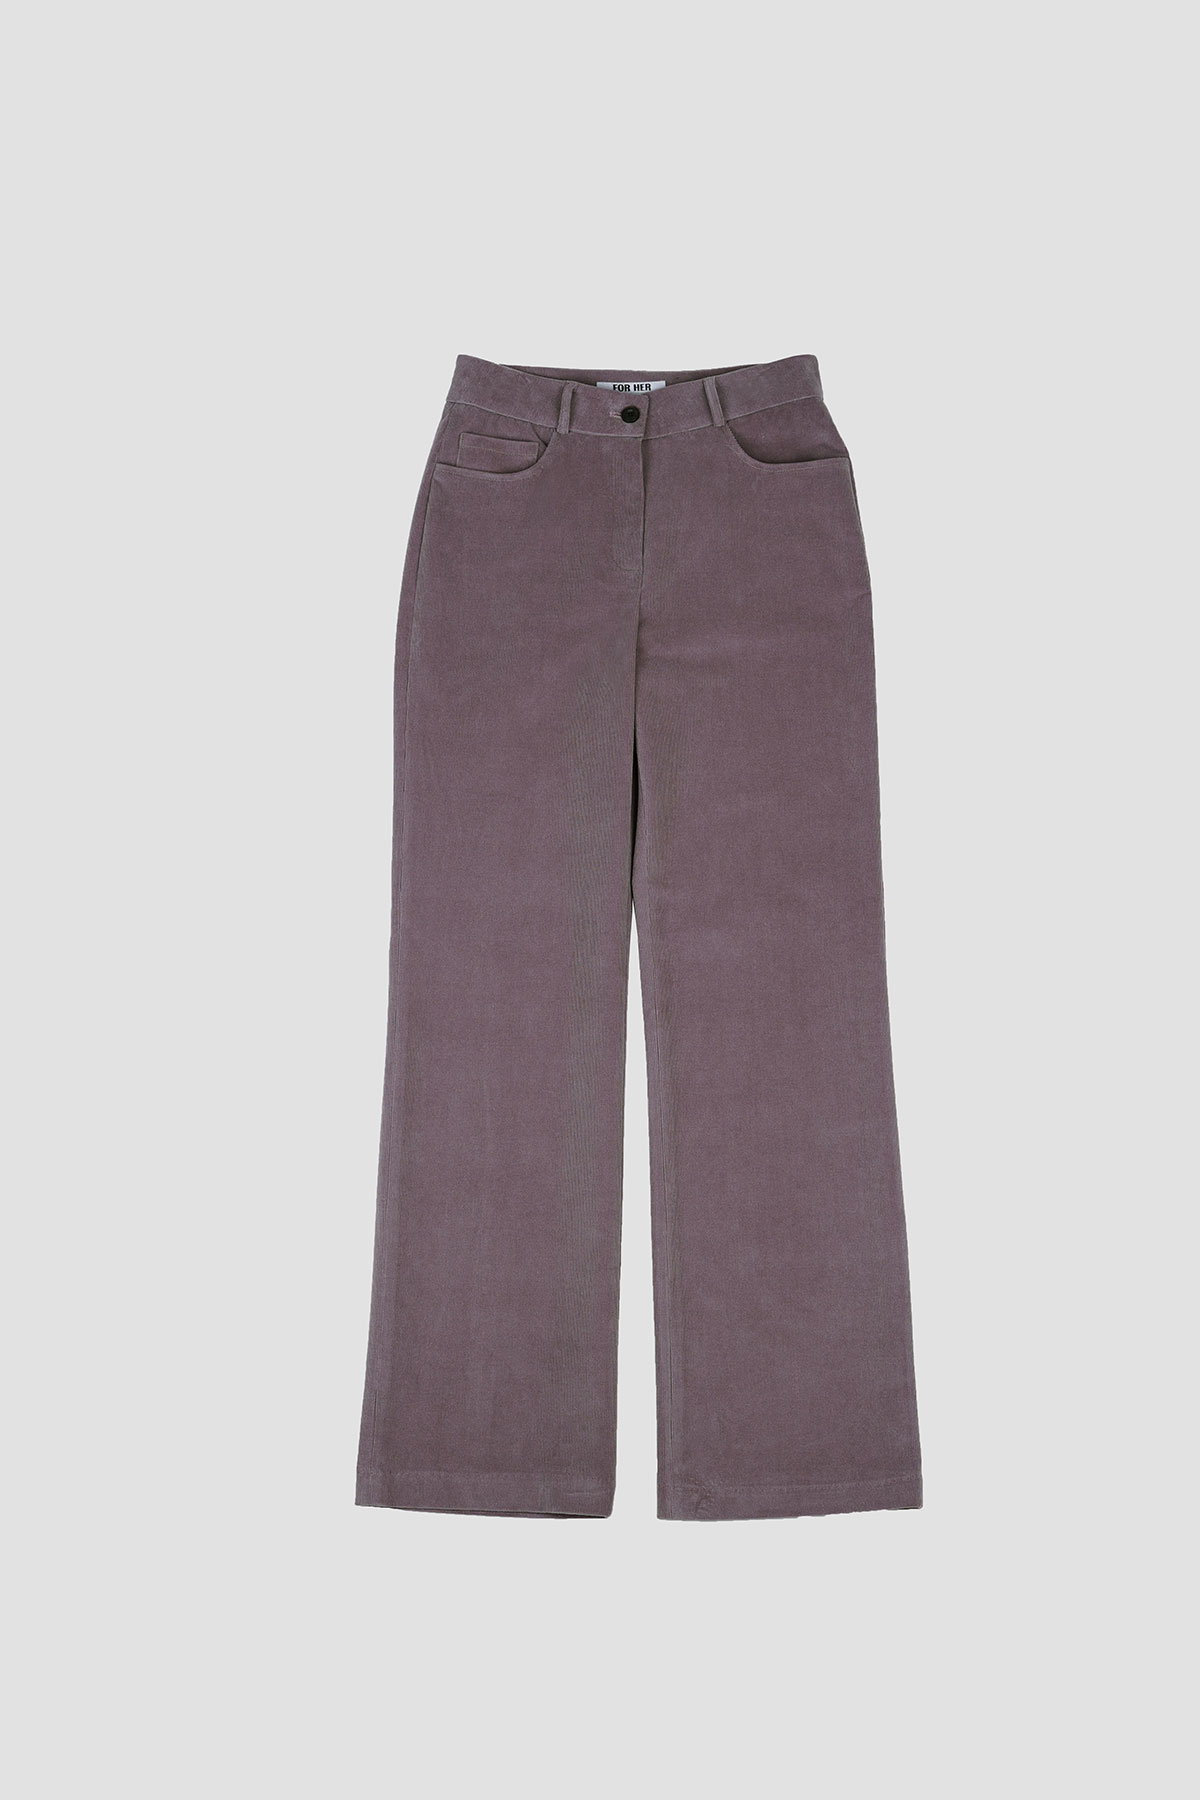 FOR HER CORDUROY PANTS (VIOLET) 3차